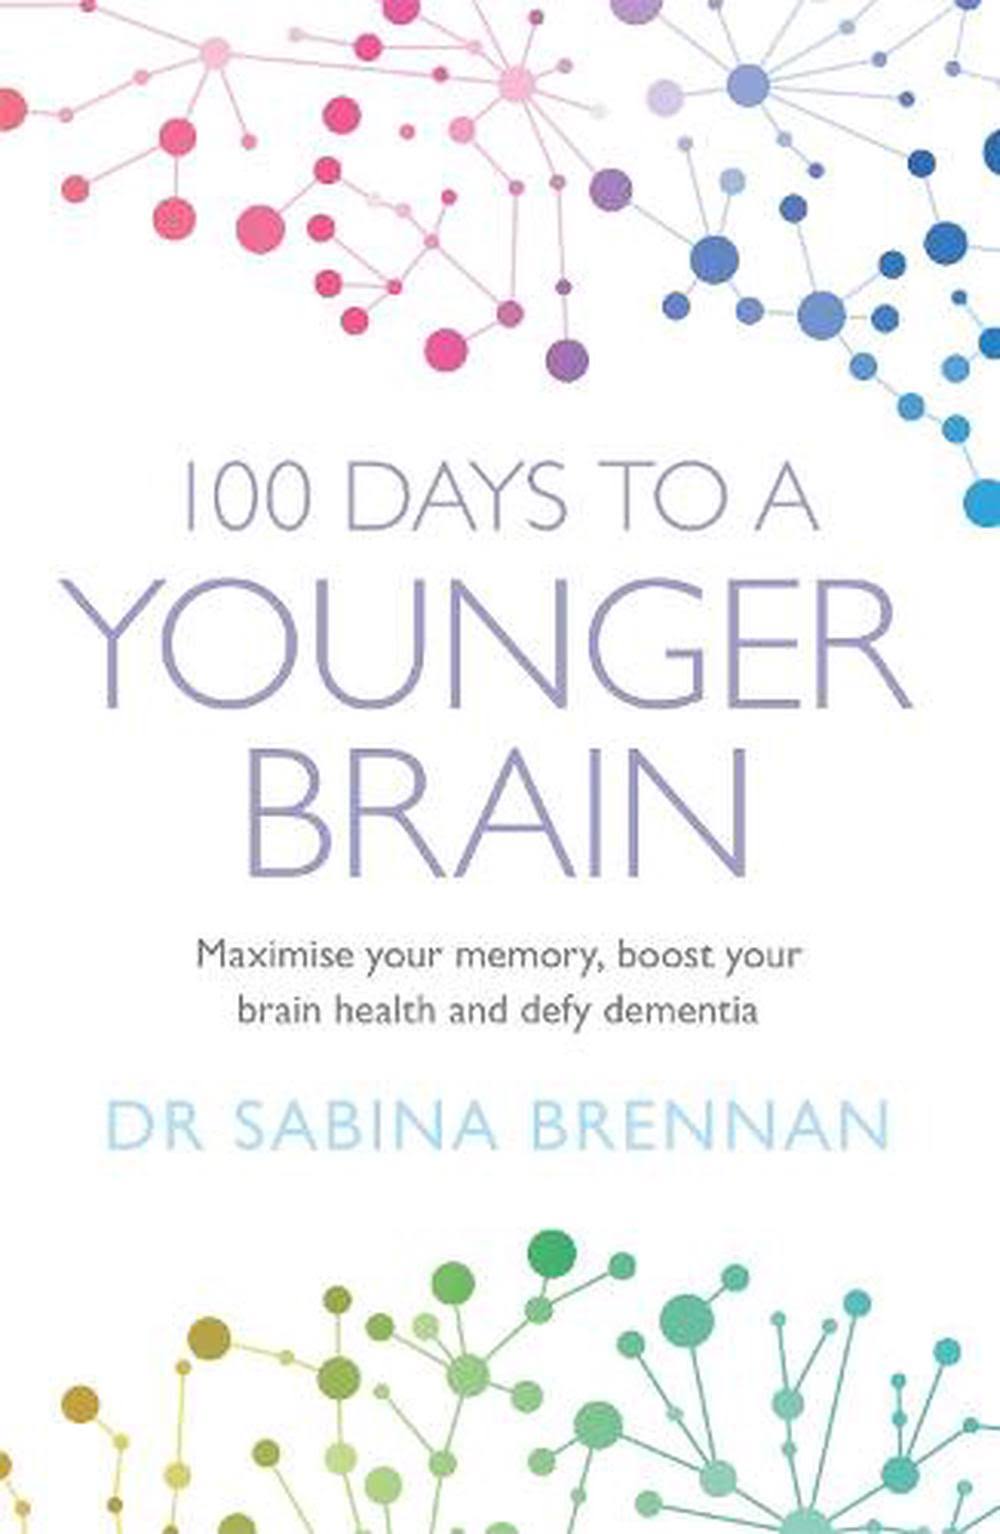 100 Days to a Younger Brain: Maximise Your Memory, Boost Your Brain Health and Defy Dementia [Book]